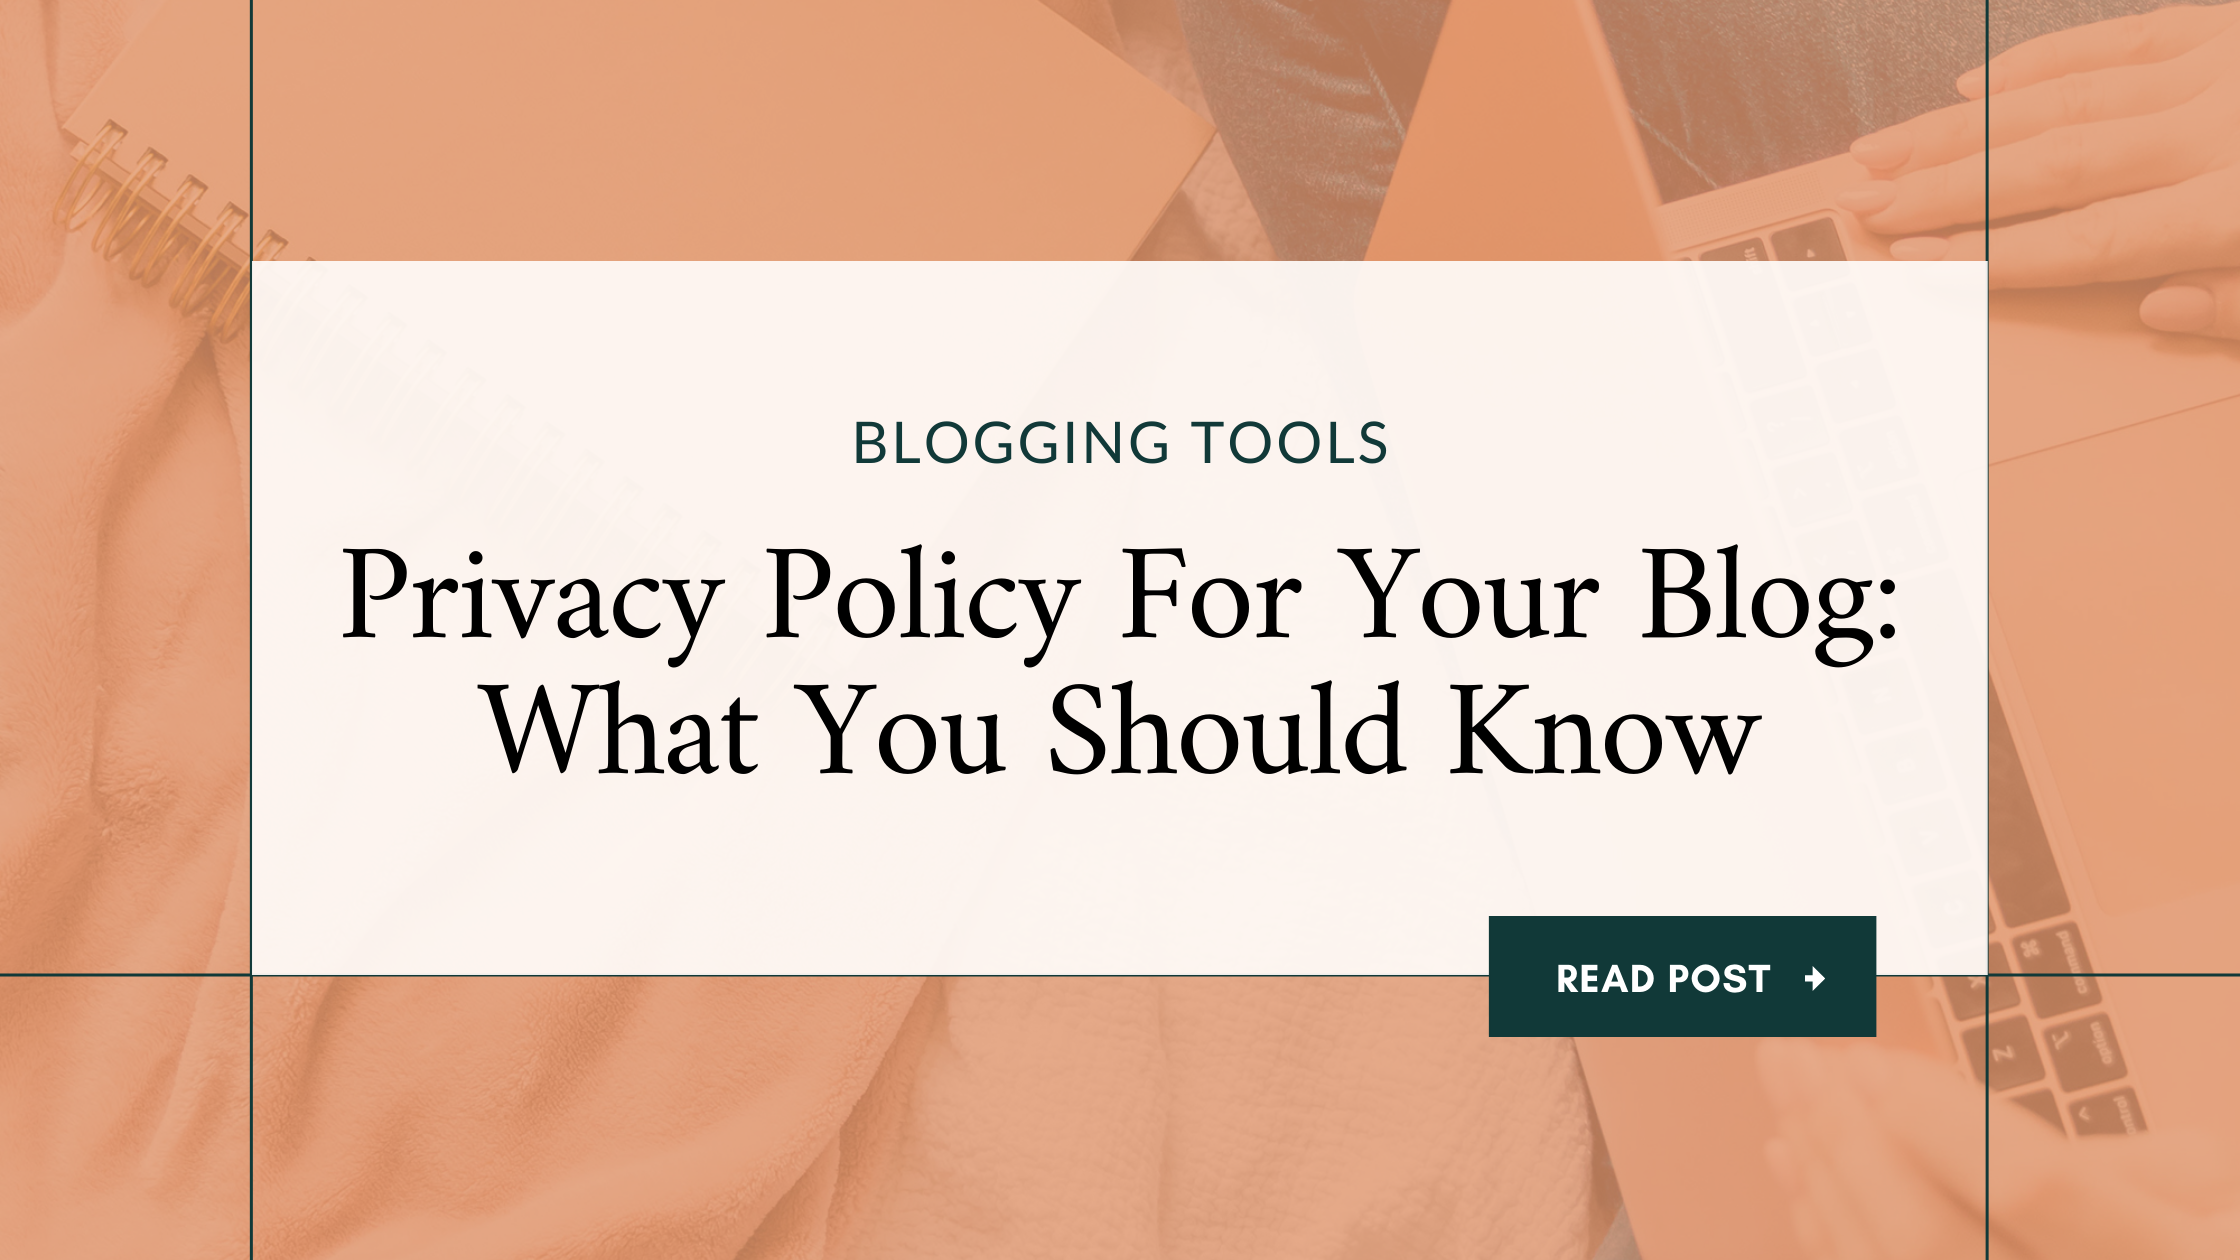 Privacy Policy For Blog: What You Should Know